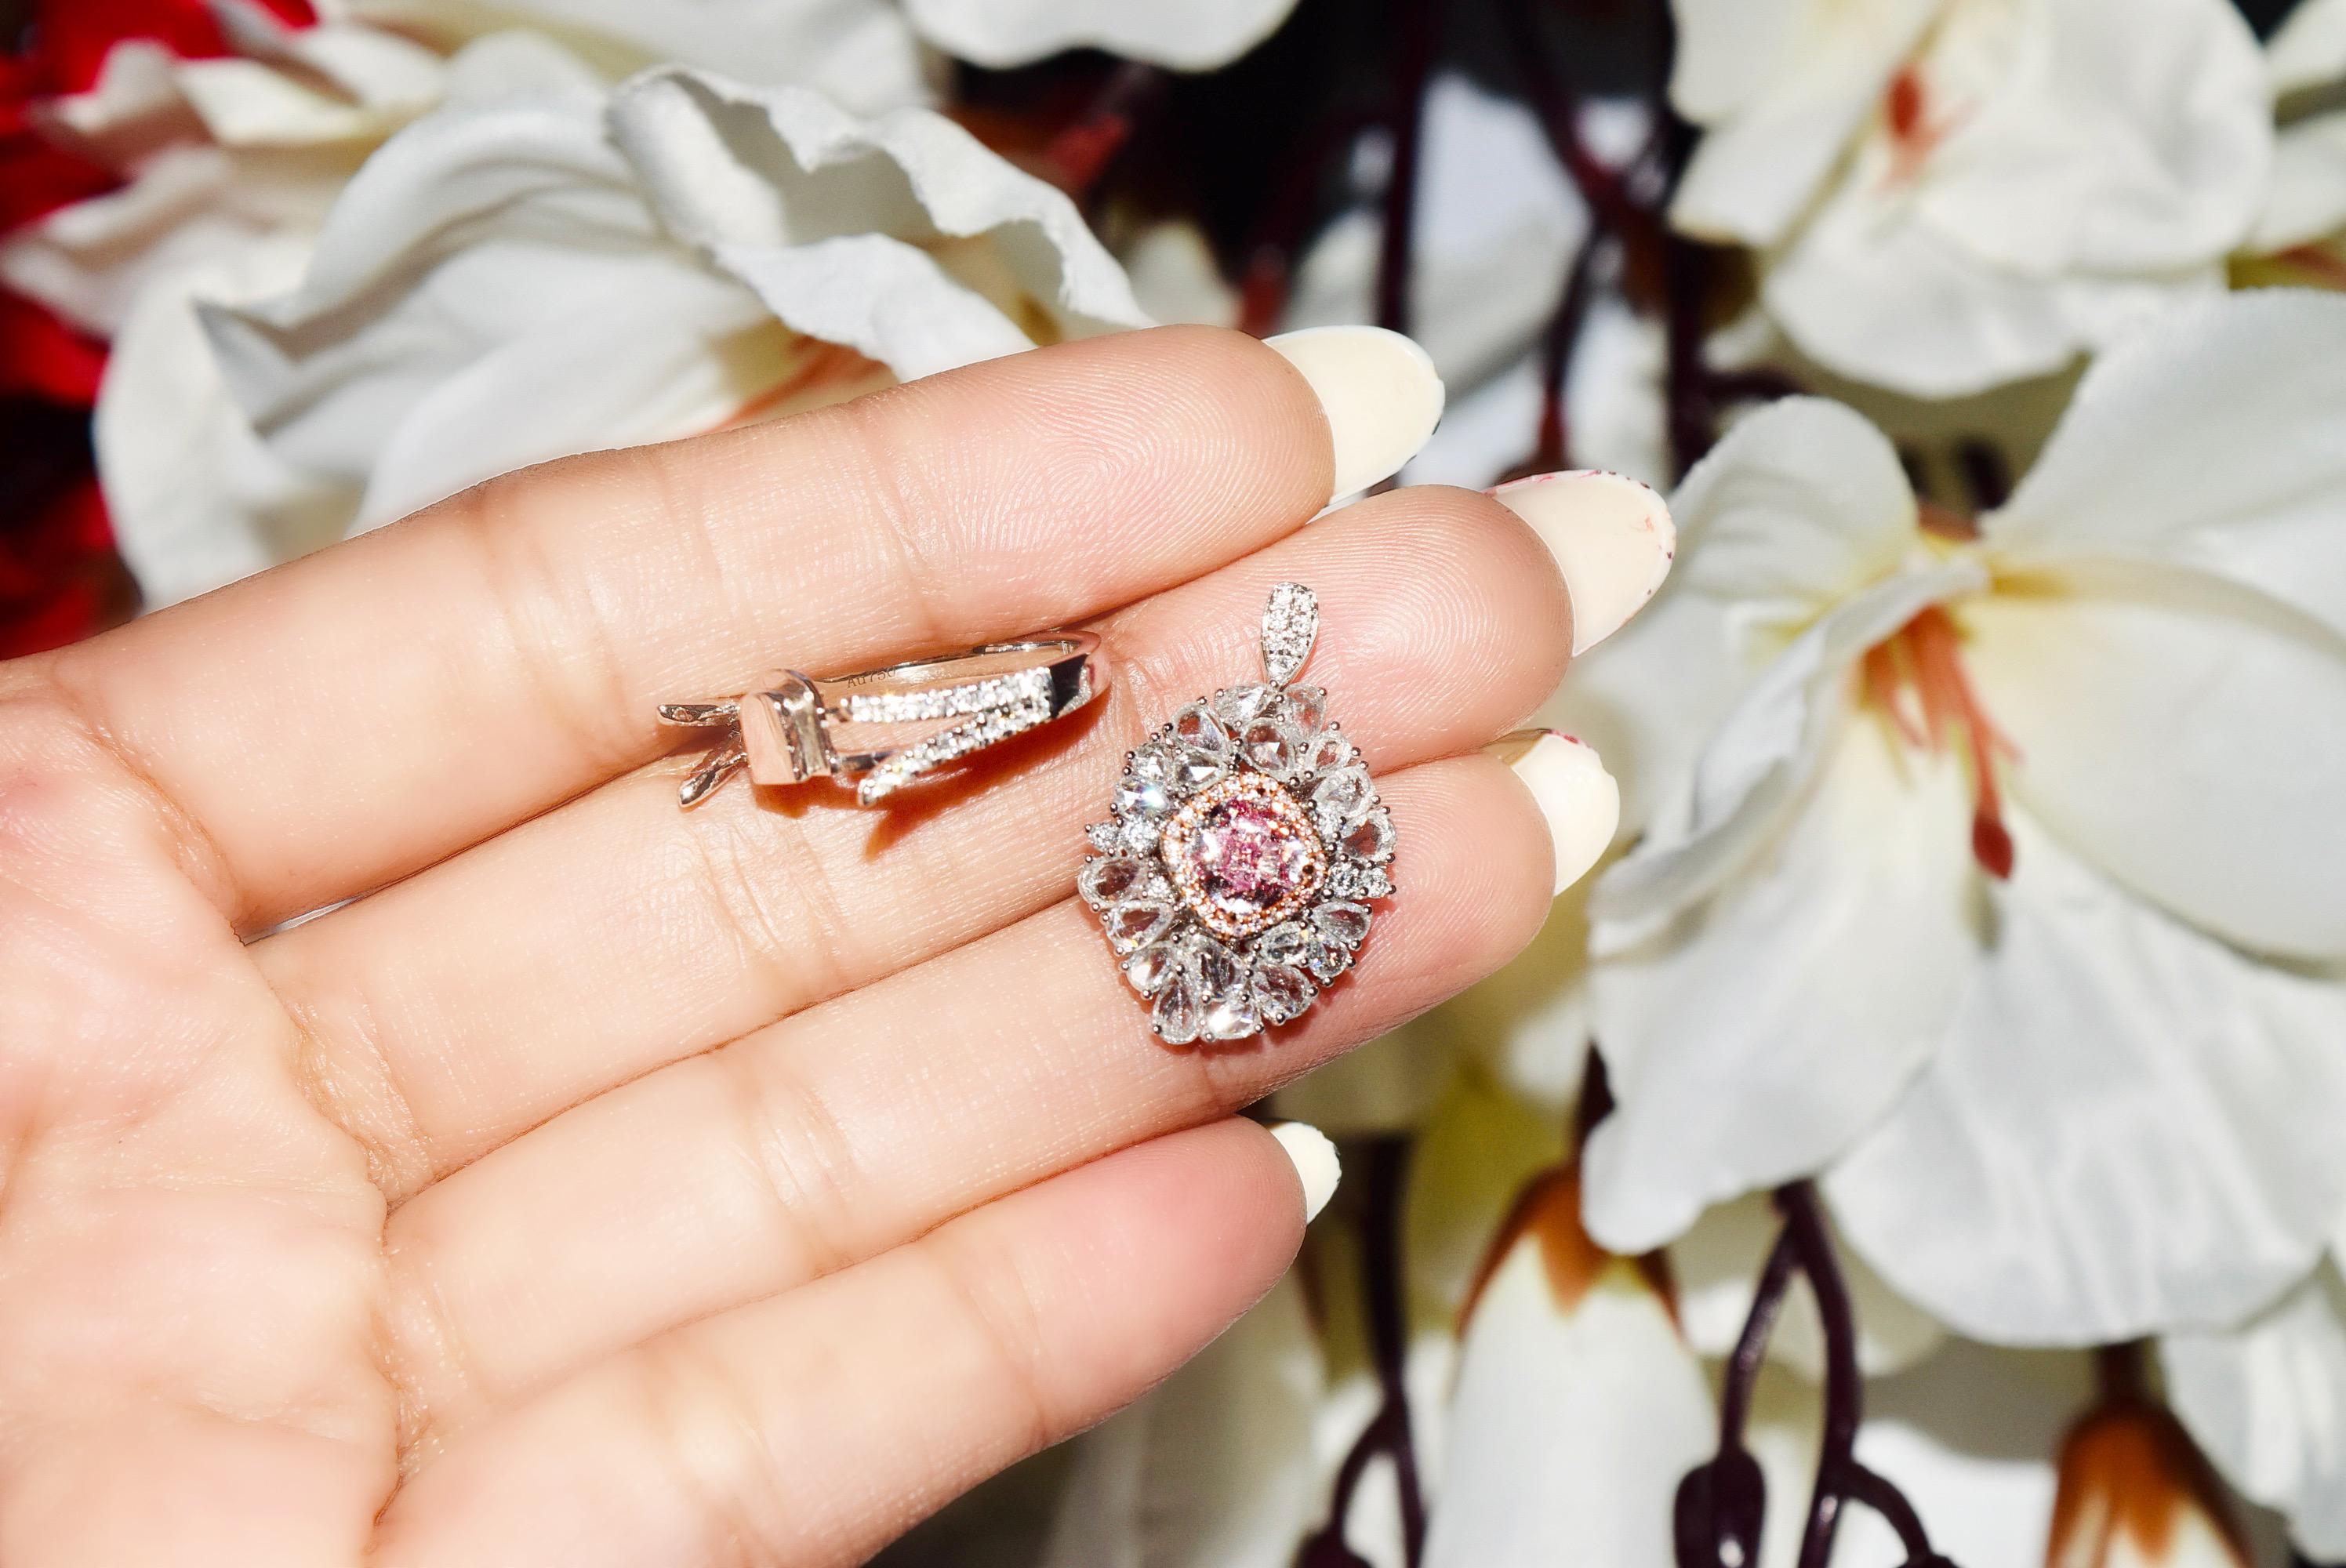 **100% NATURAL FANCY COLOUR DIAMOND JEWELRY**

✪ Jewelry Details ✪

♦ MAIN STONE DETAILS

➛ Stone Shape: Cushion
➛ Stone Color: Light Pink
➛ Stone Clarity: VS2
➛ Stone Weight: 1.01 carats
➛ GIA certified

♦ SIDE STONE DETAILS

➛ Side white diamonds